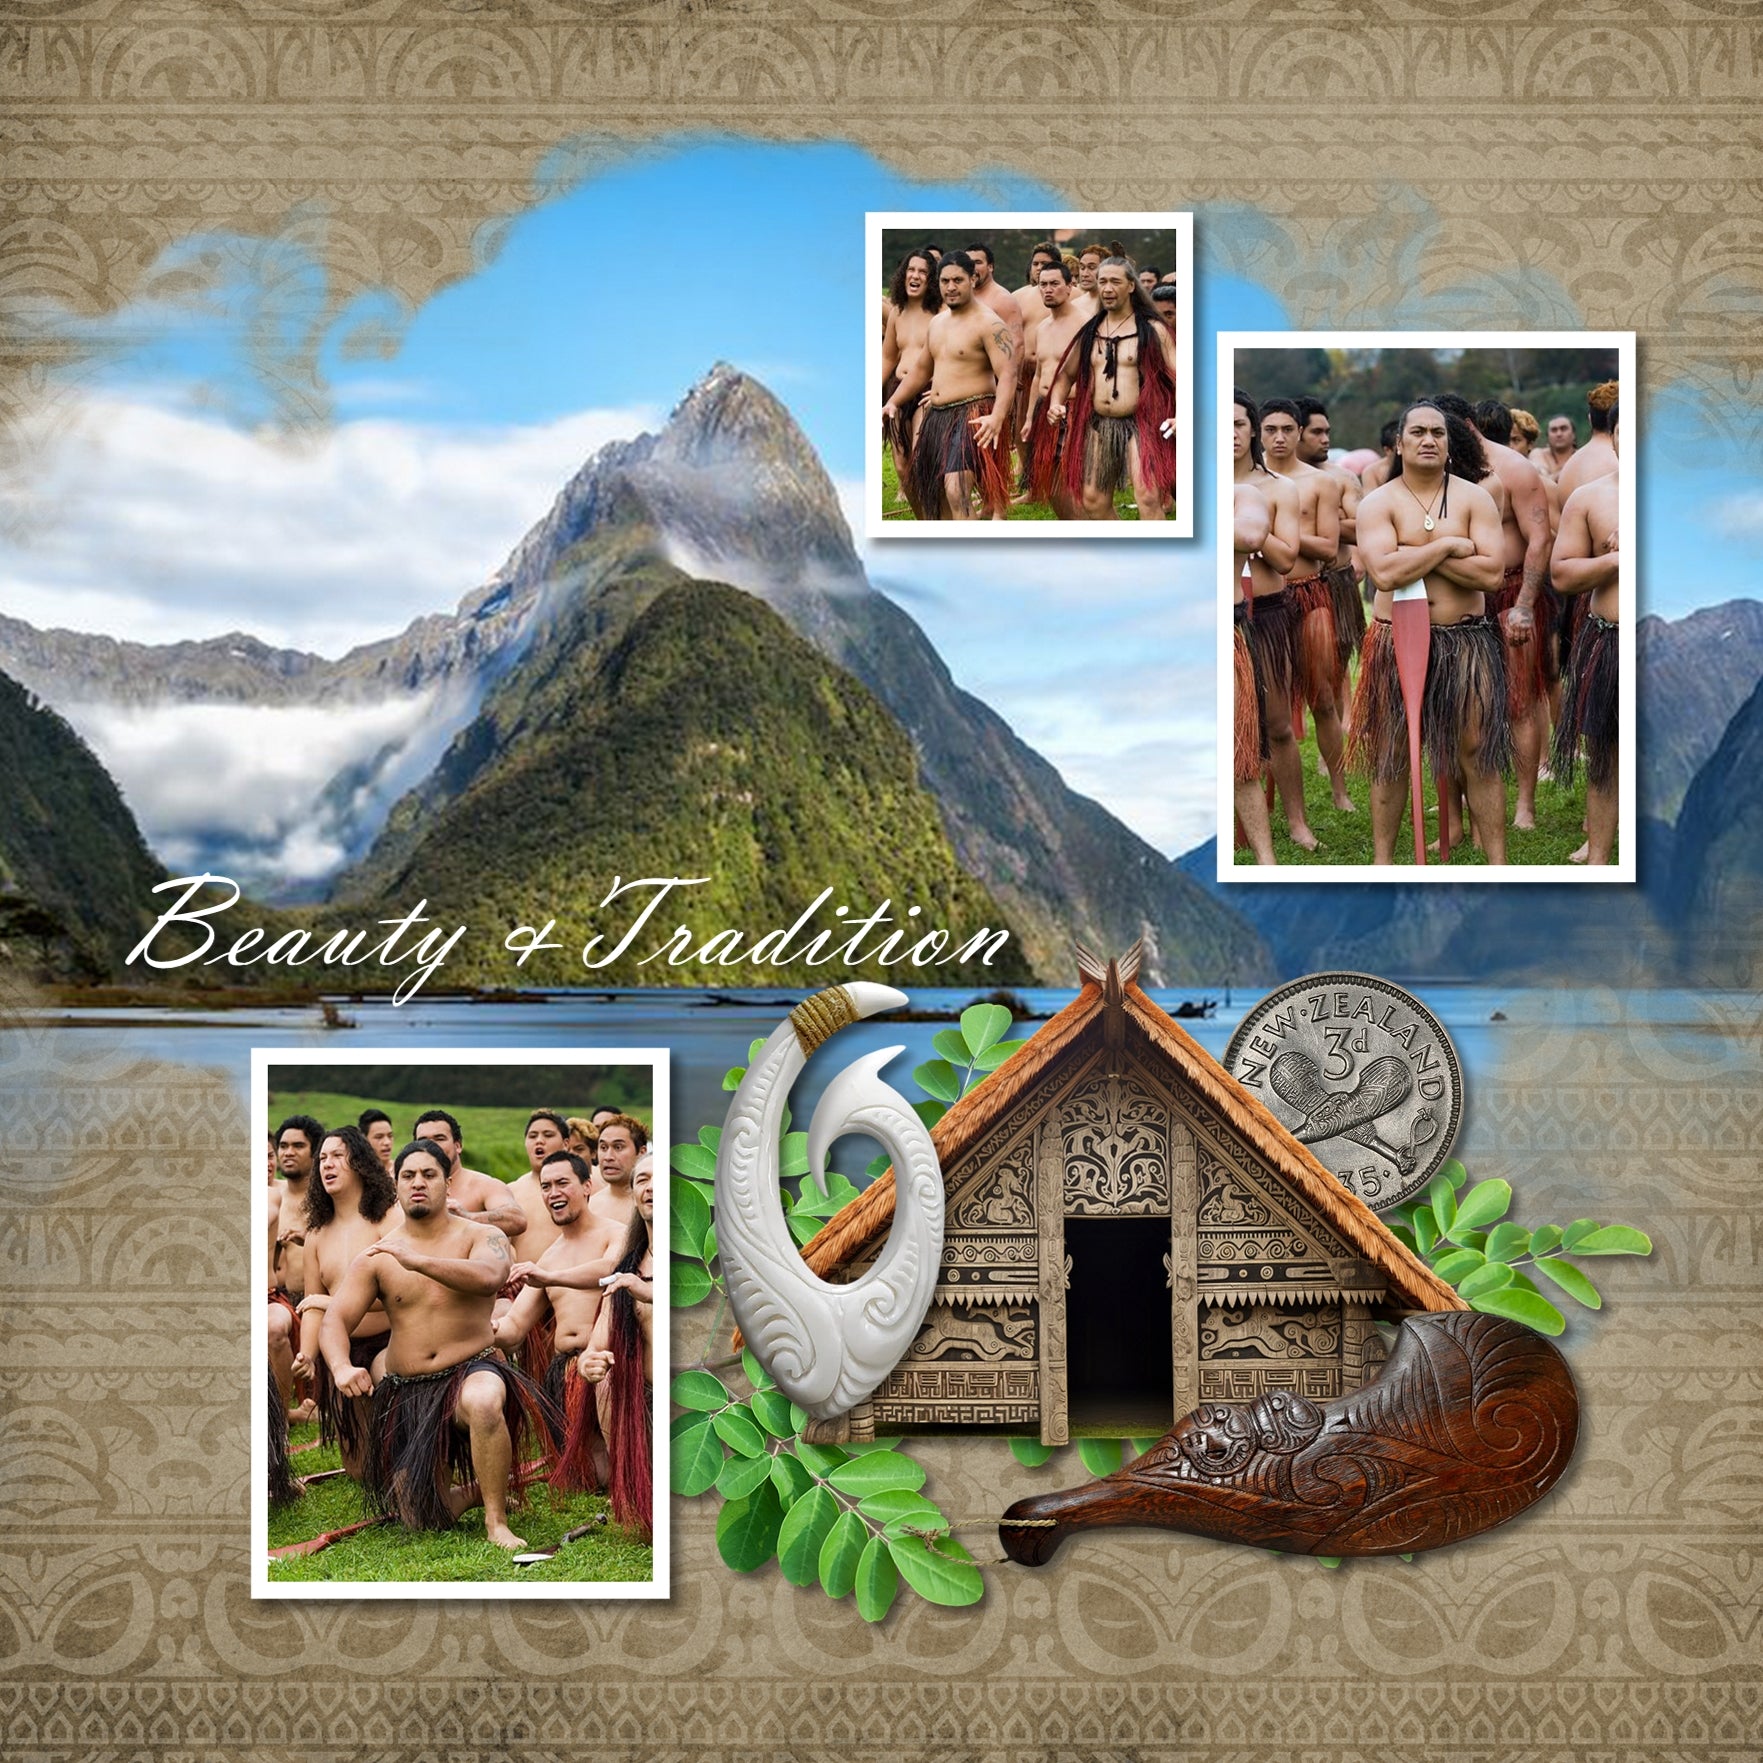 Highlight your vacation memories with these beautiful, digital scenic masked photo overlays by Lucky Girl Creative. Great for digital scrapbooking holidays to New Zealand and exploring native and indigenous life! With transparent edges, these masked photographs blend seamlessly into any background paper and make the perfect backdrop for all travel, vacation, and holiday pages.